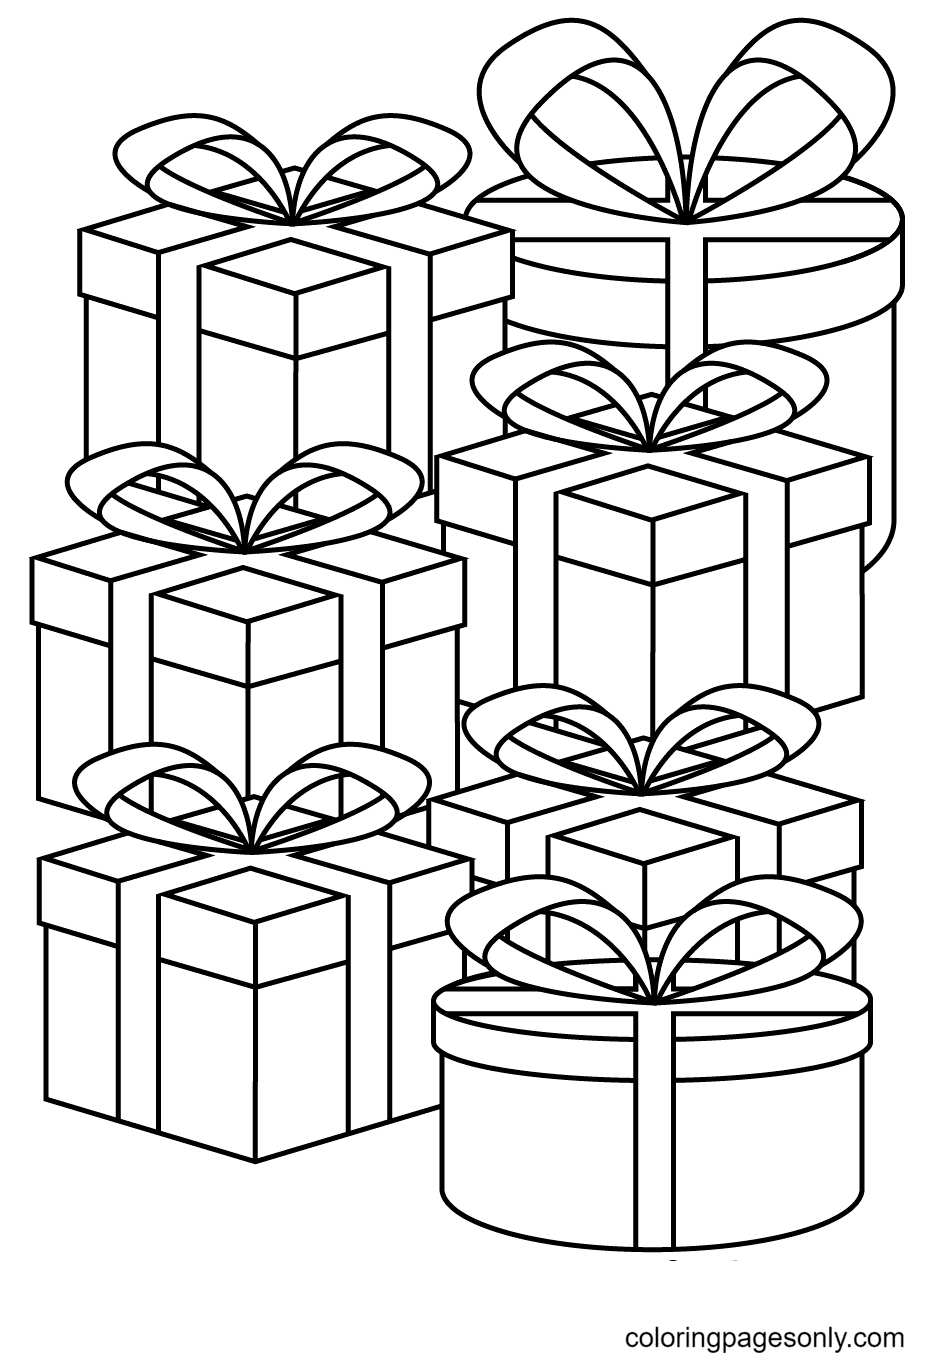 Lovely Xmas Gifts Coloring Pages